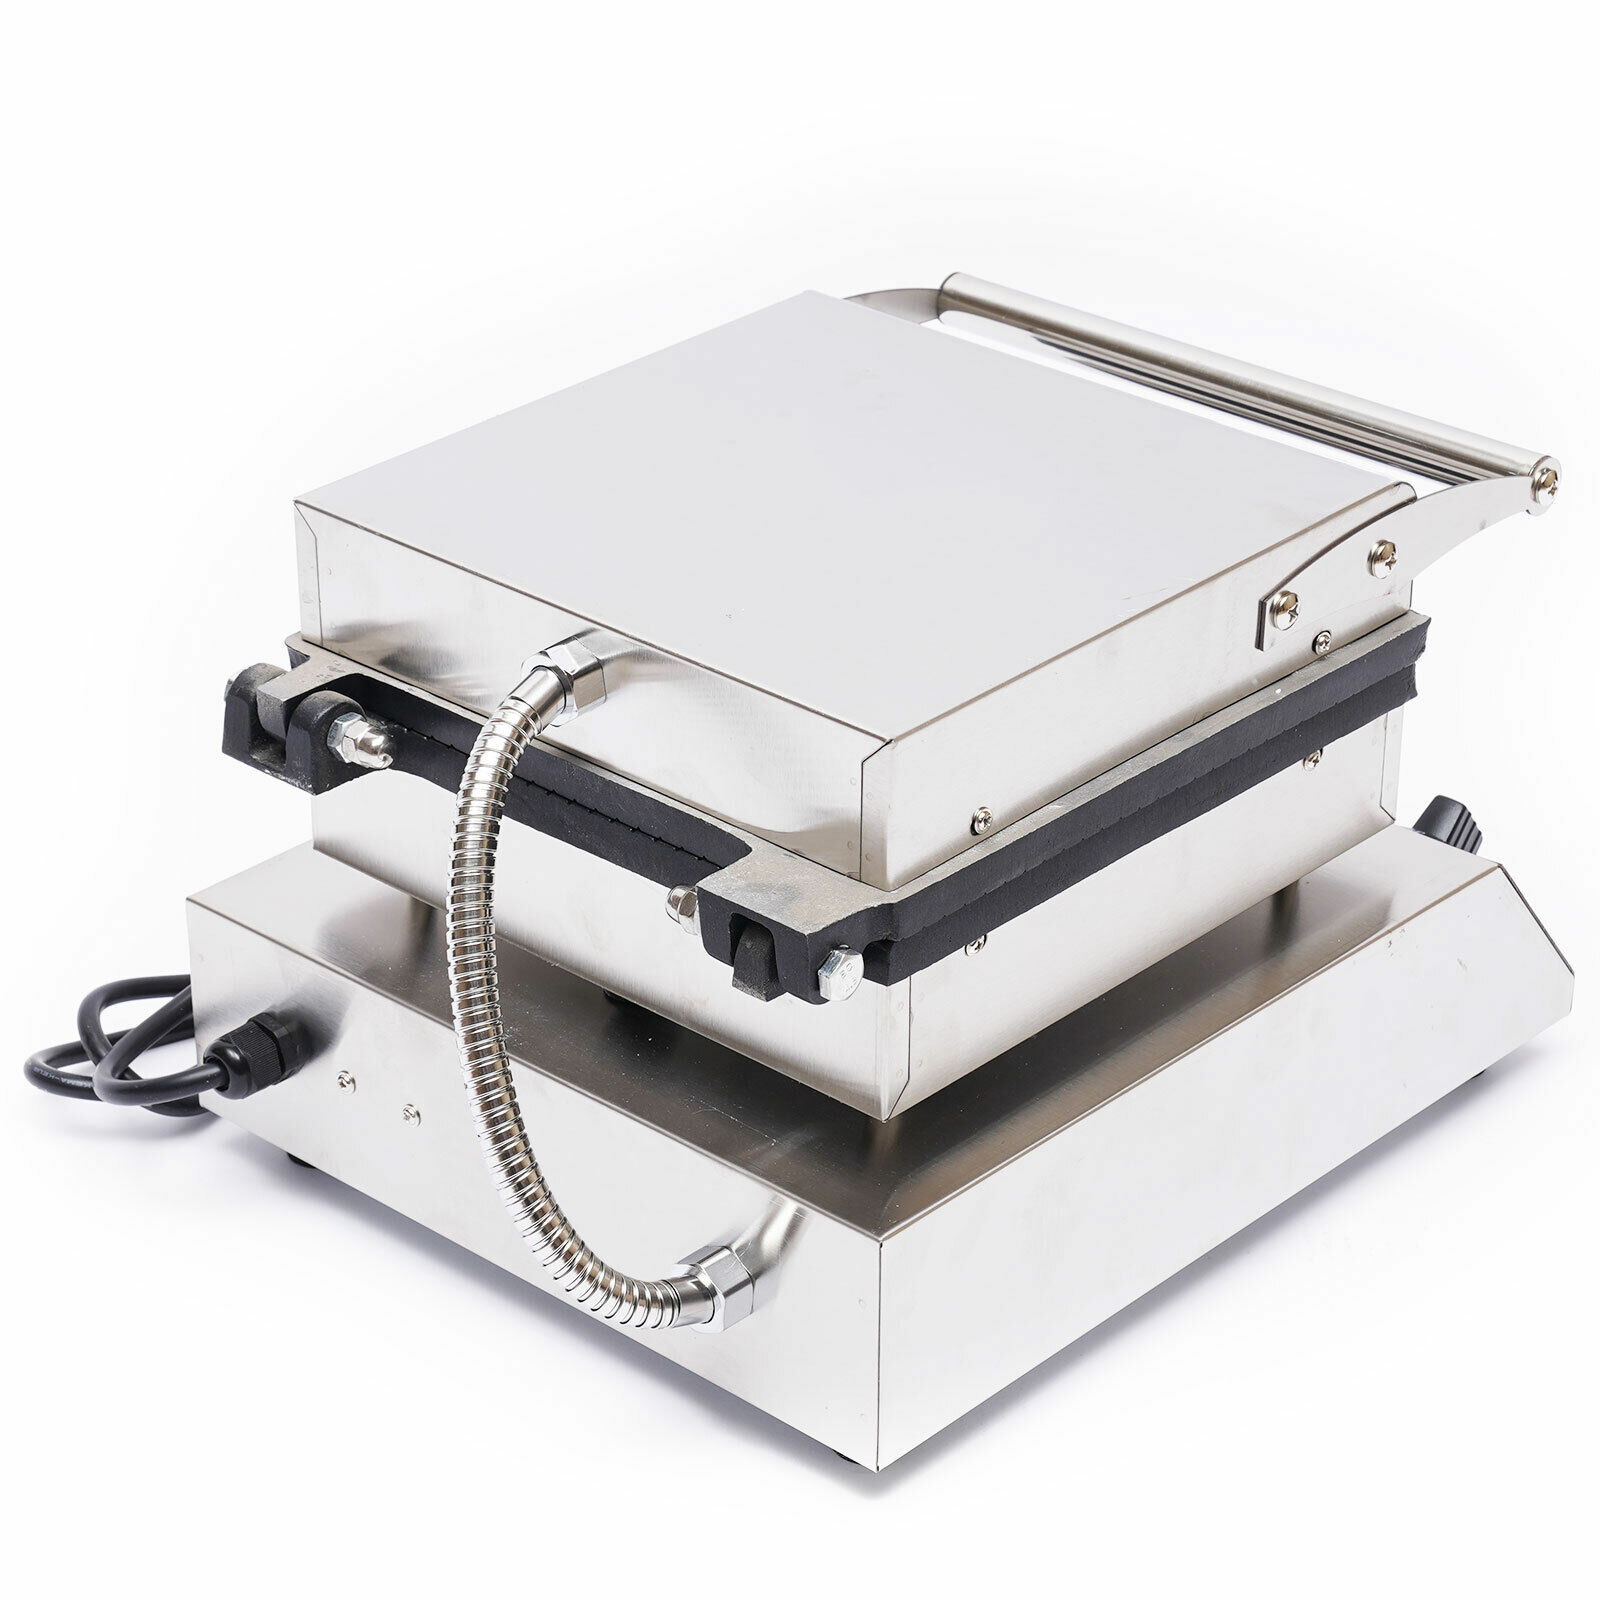 thinkstar 1700W Electric Waffle Machine Lolly Waffle Maker For Bake Food In The Shop/Field